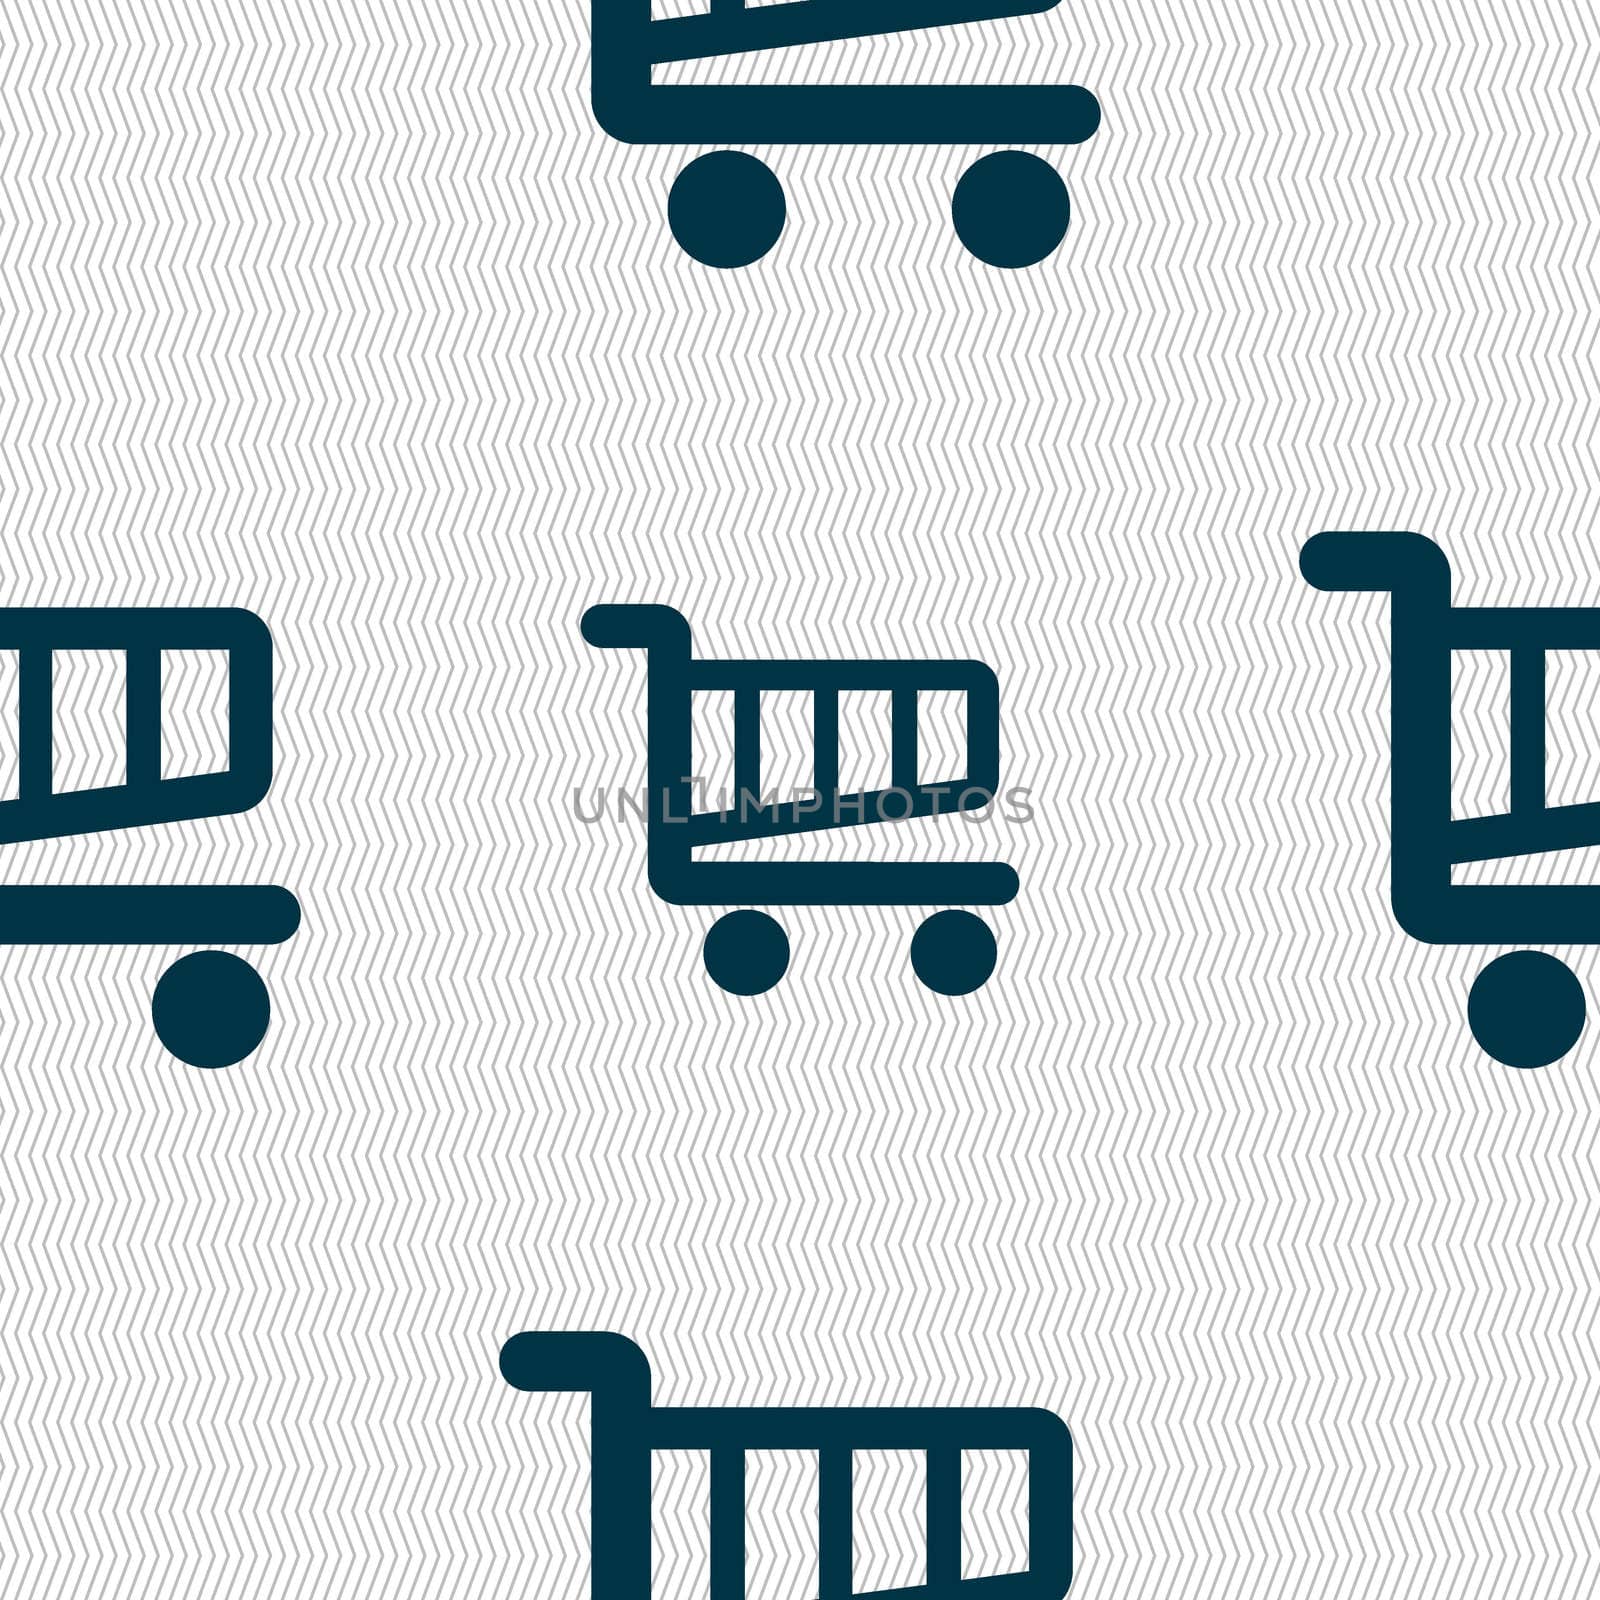 Shopping Cart sign icon. Online buying button. Seamless abstract background with geometric shapes. illustration